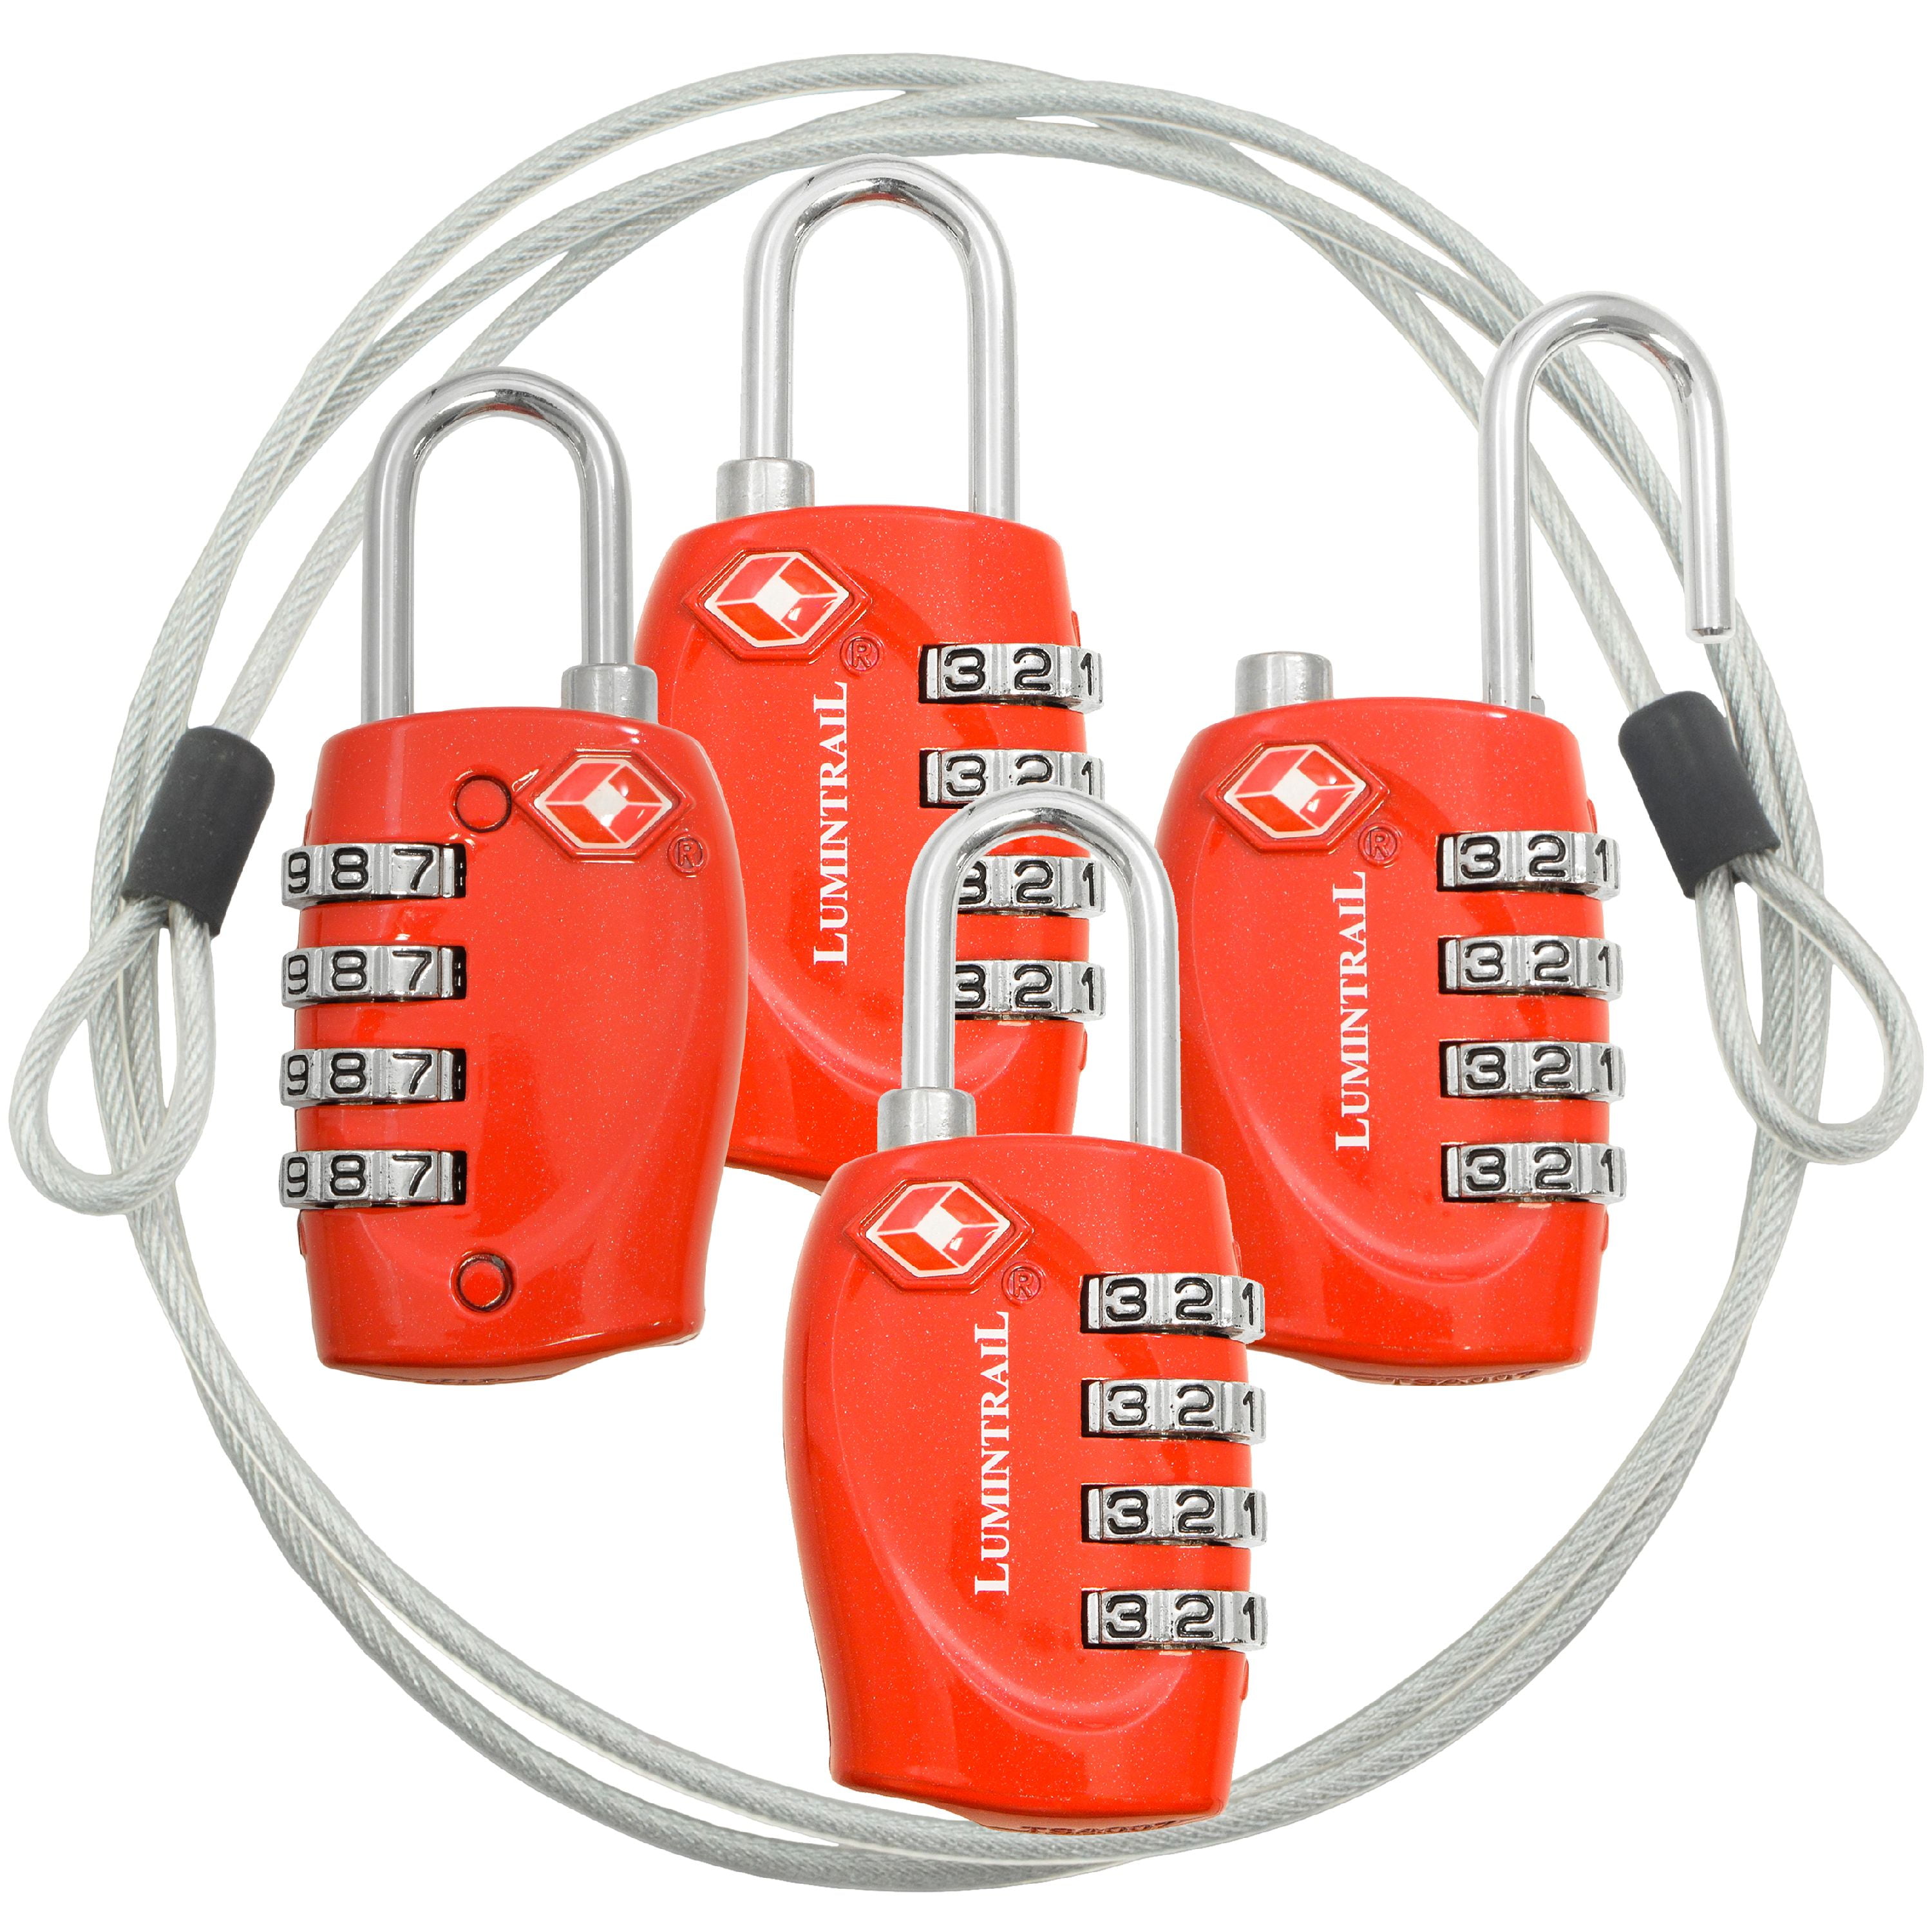 Re-settable Combination with Alloy Body TSA Approved Cable Luggage Locks 4 Pack Bright Colors 